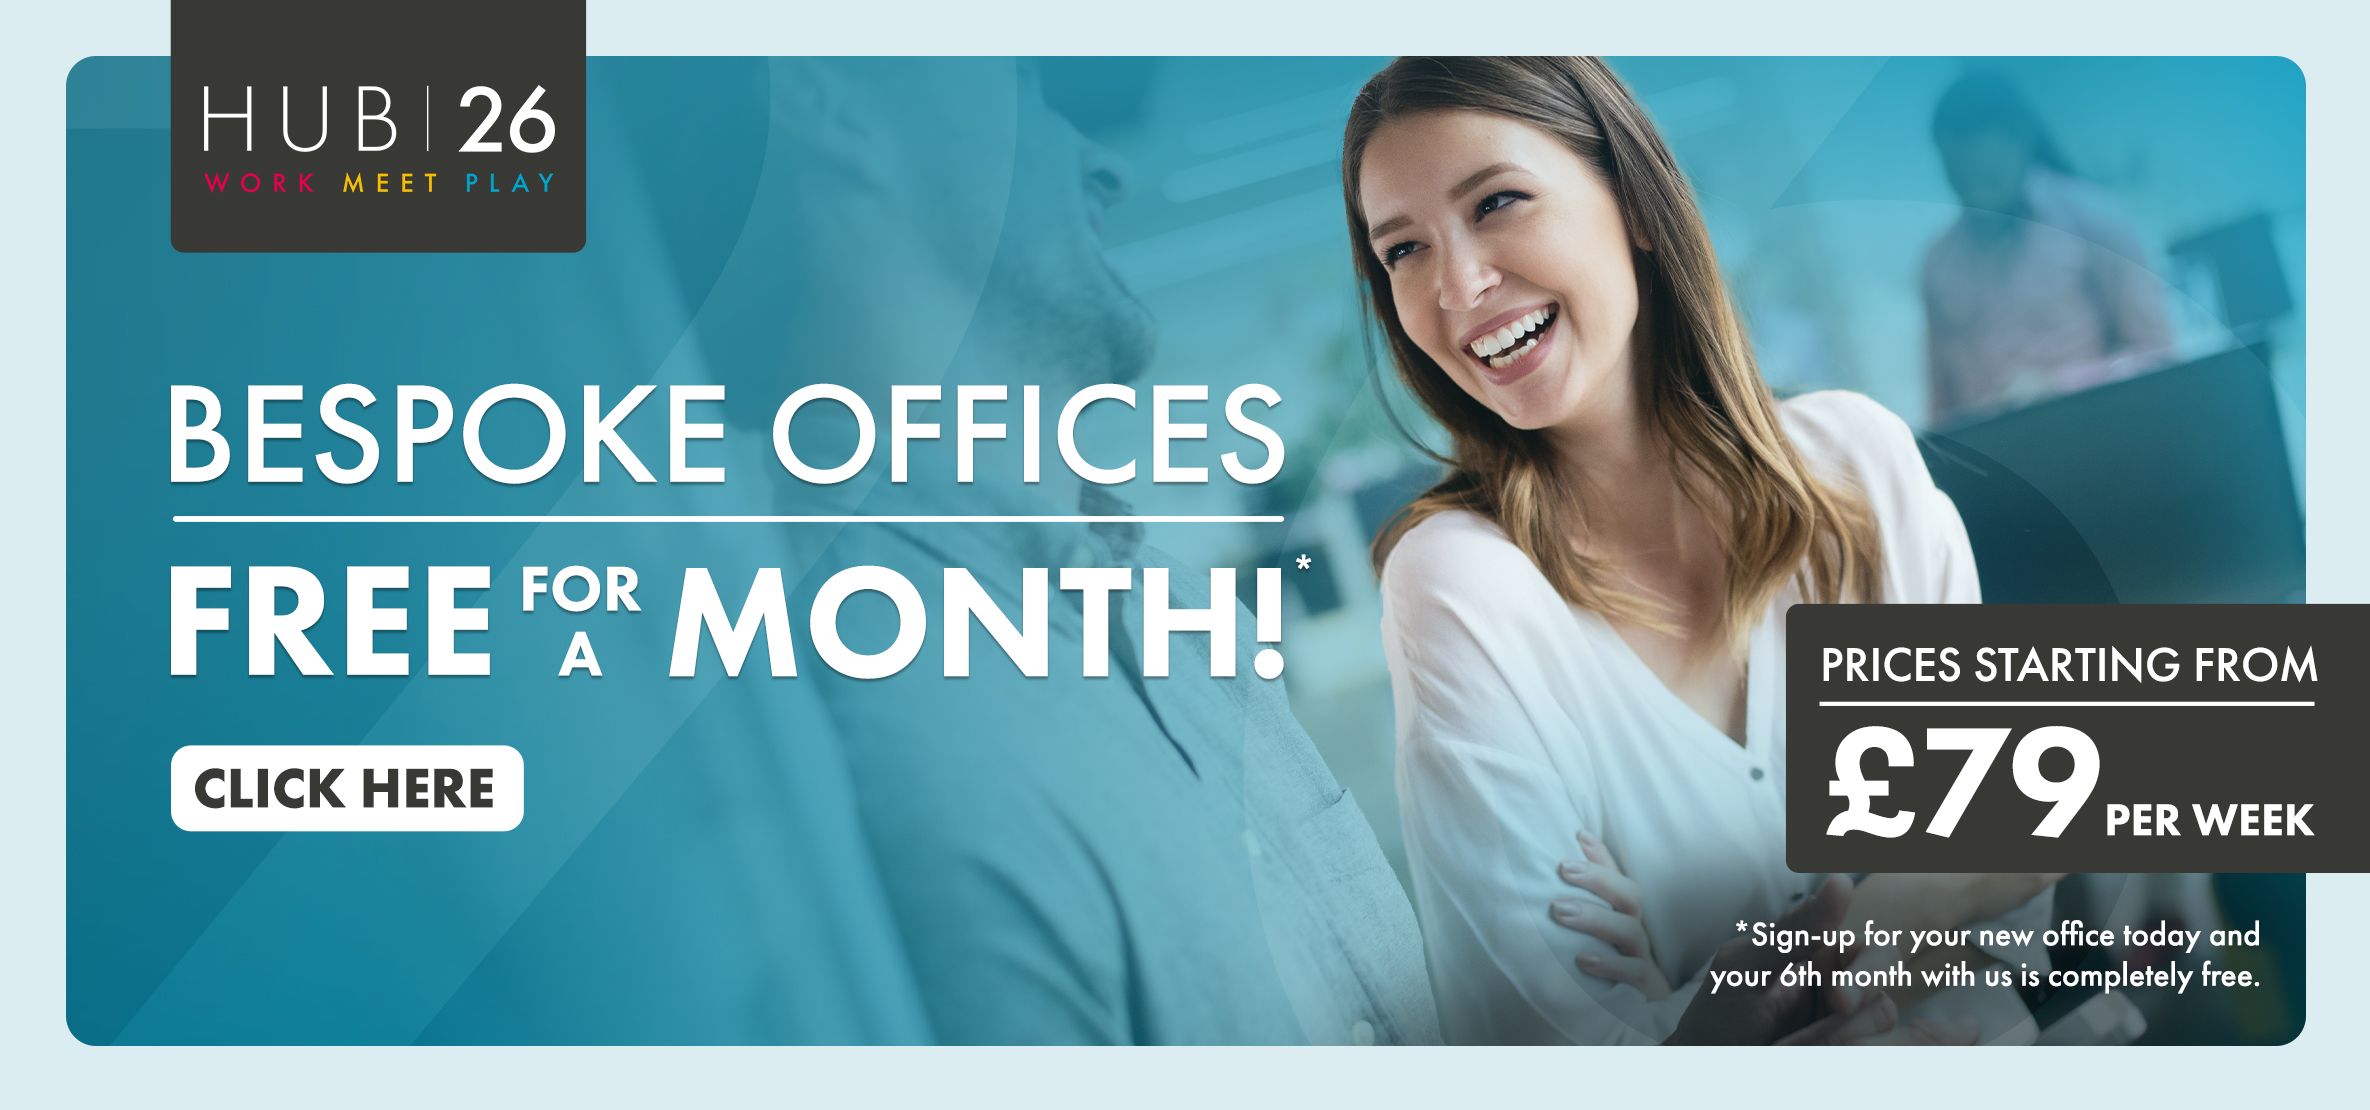 OFFICES FREE--banner copy